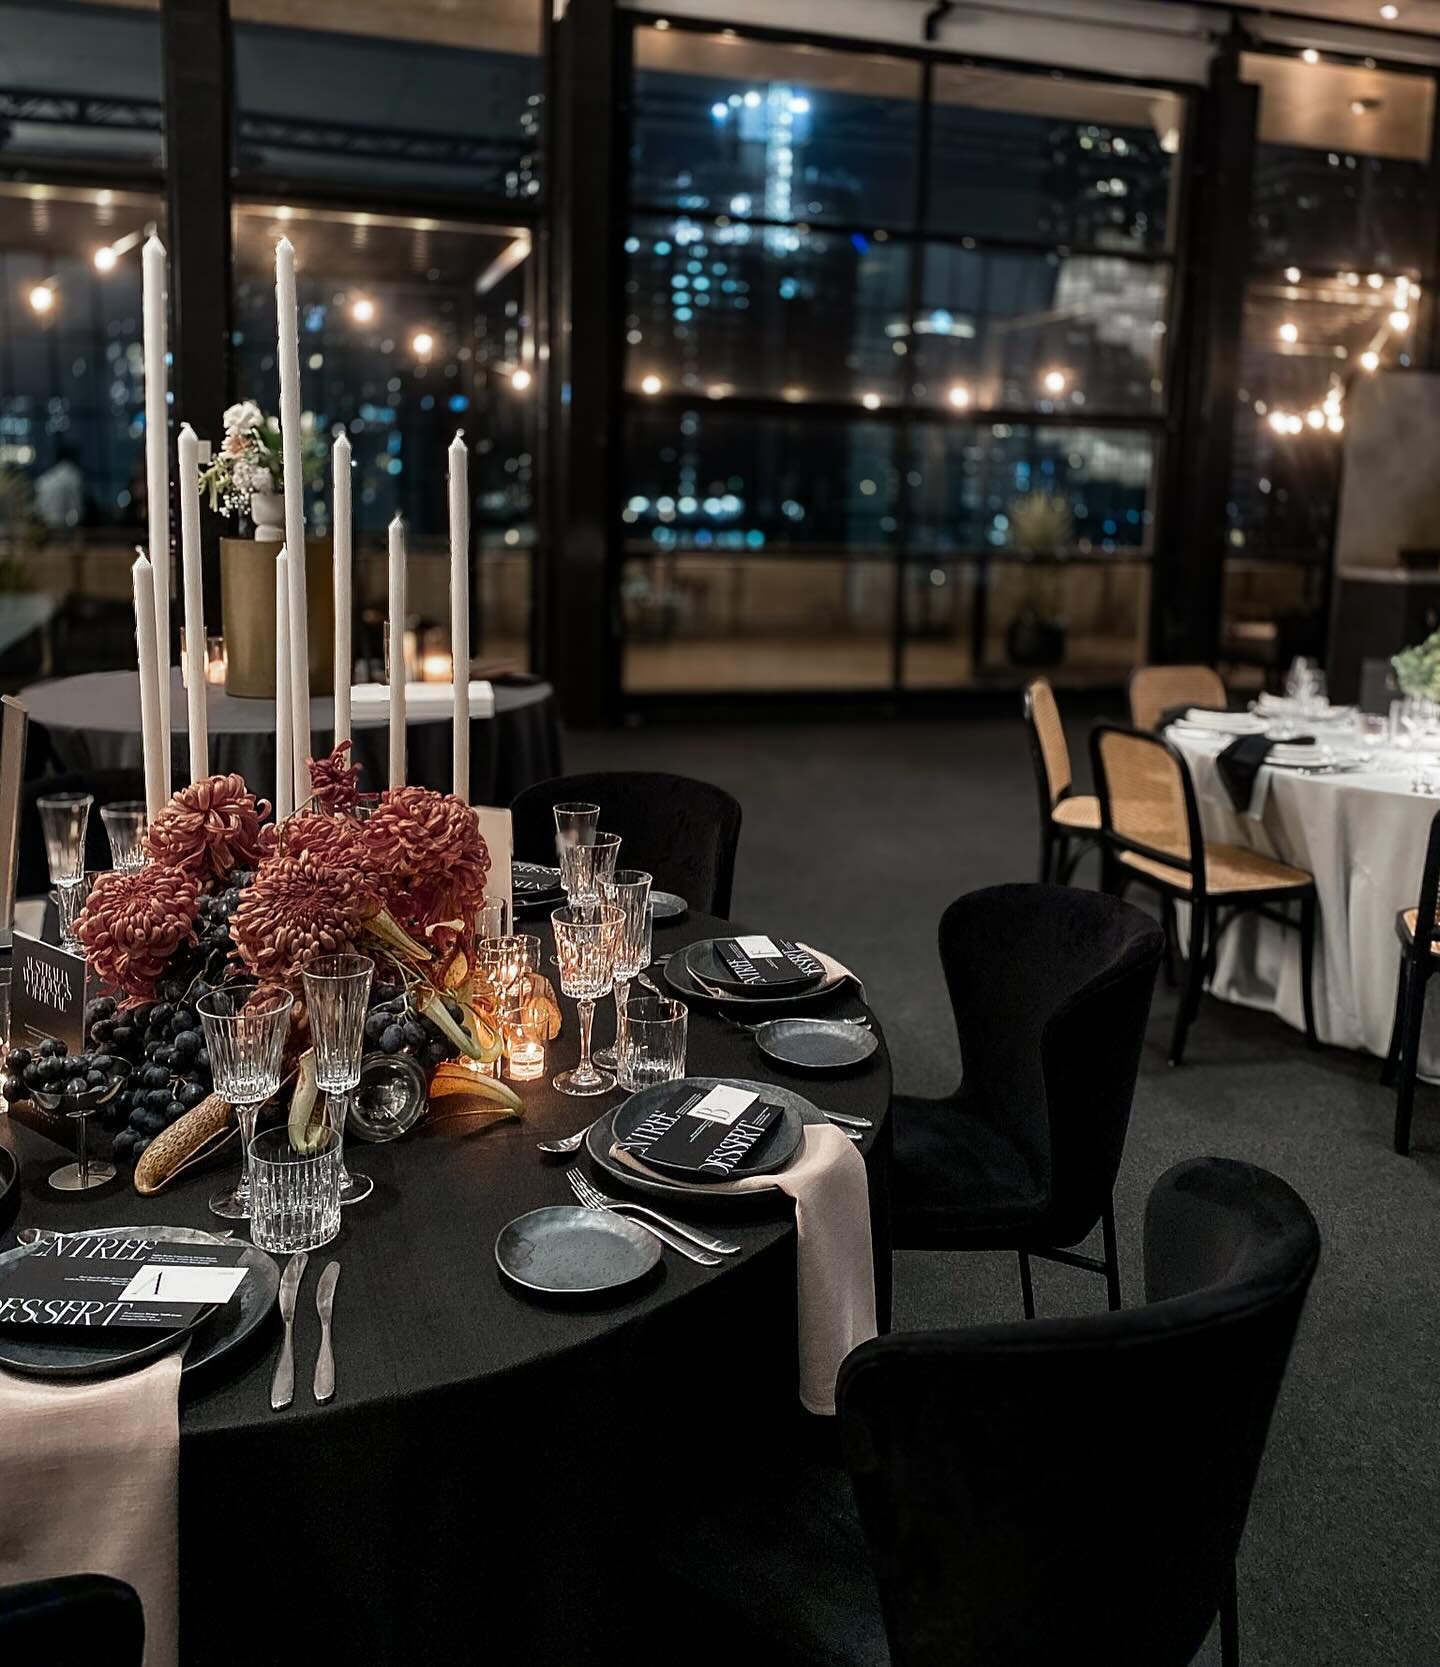 On Wednesday night, we had the incredible opportunity to showcase at Twilight Luminaire and we met some of the loveliest loved up couples. 

We also hosted an exclusive competition for all attendees, and we were overwhelmed by the response. So many p